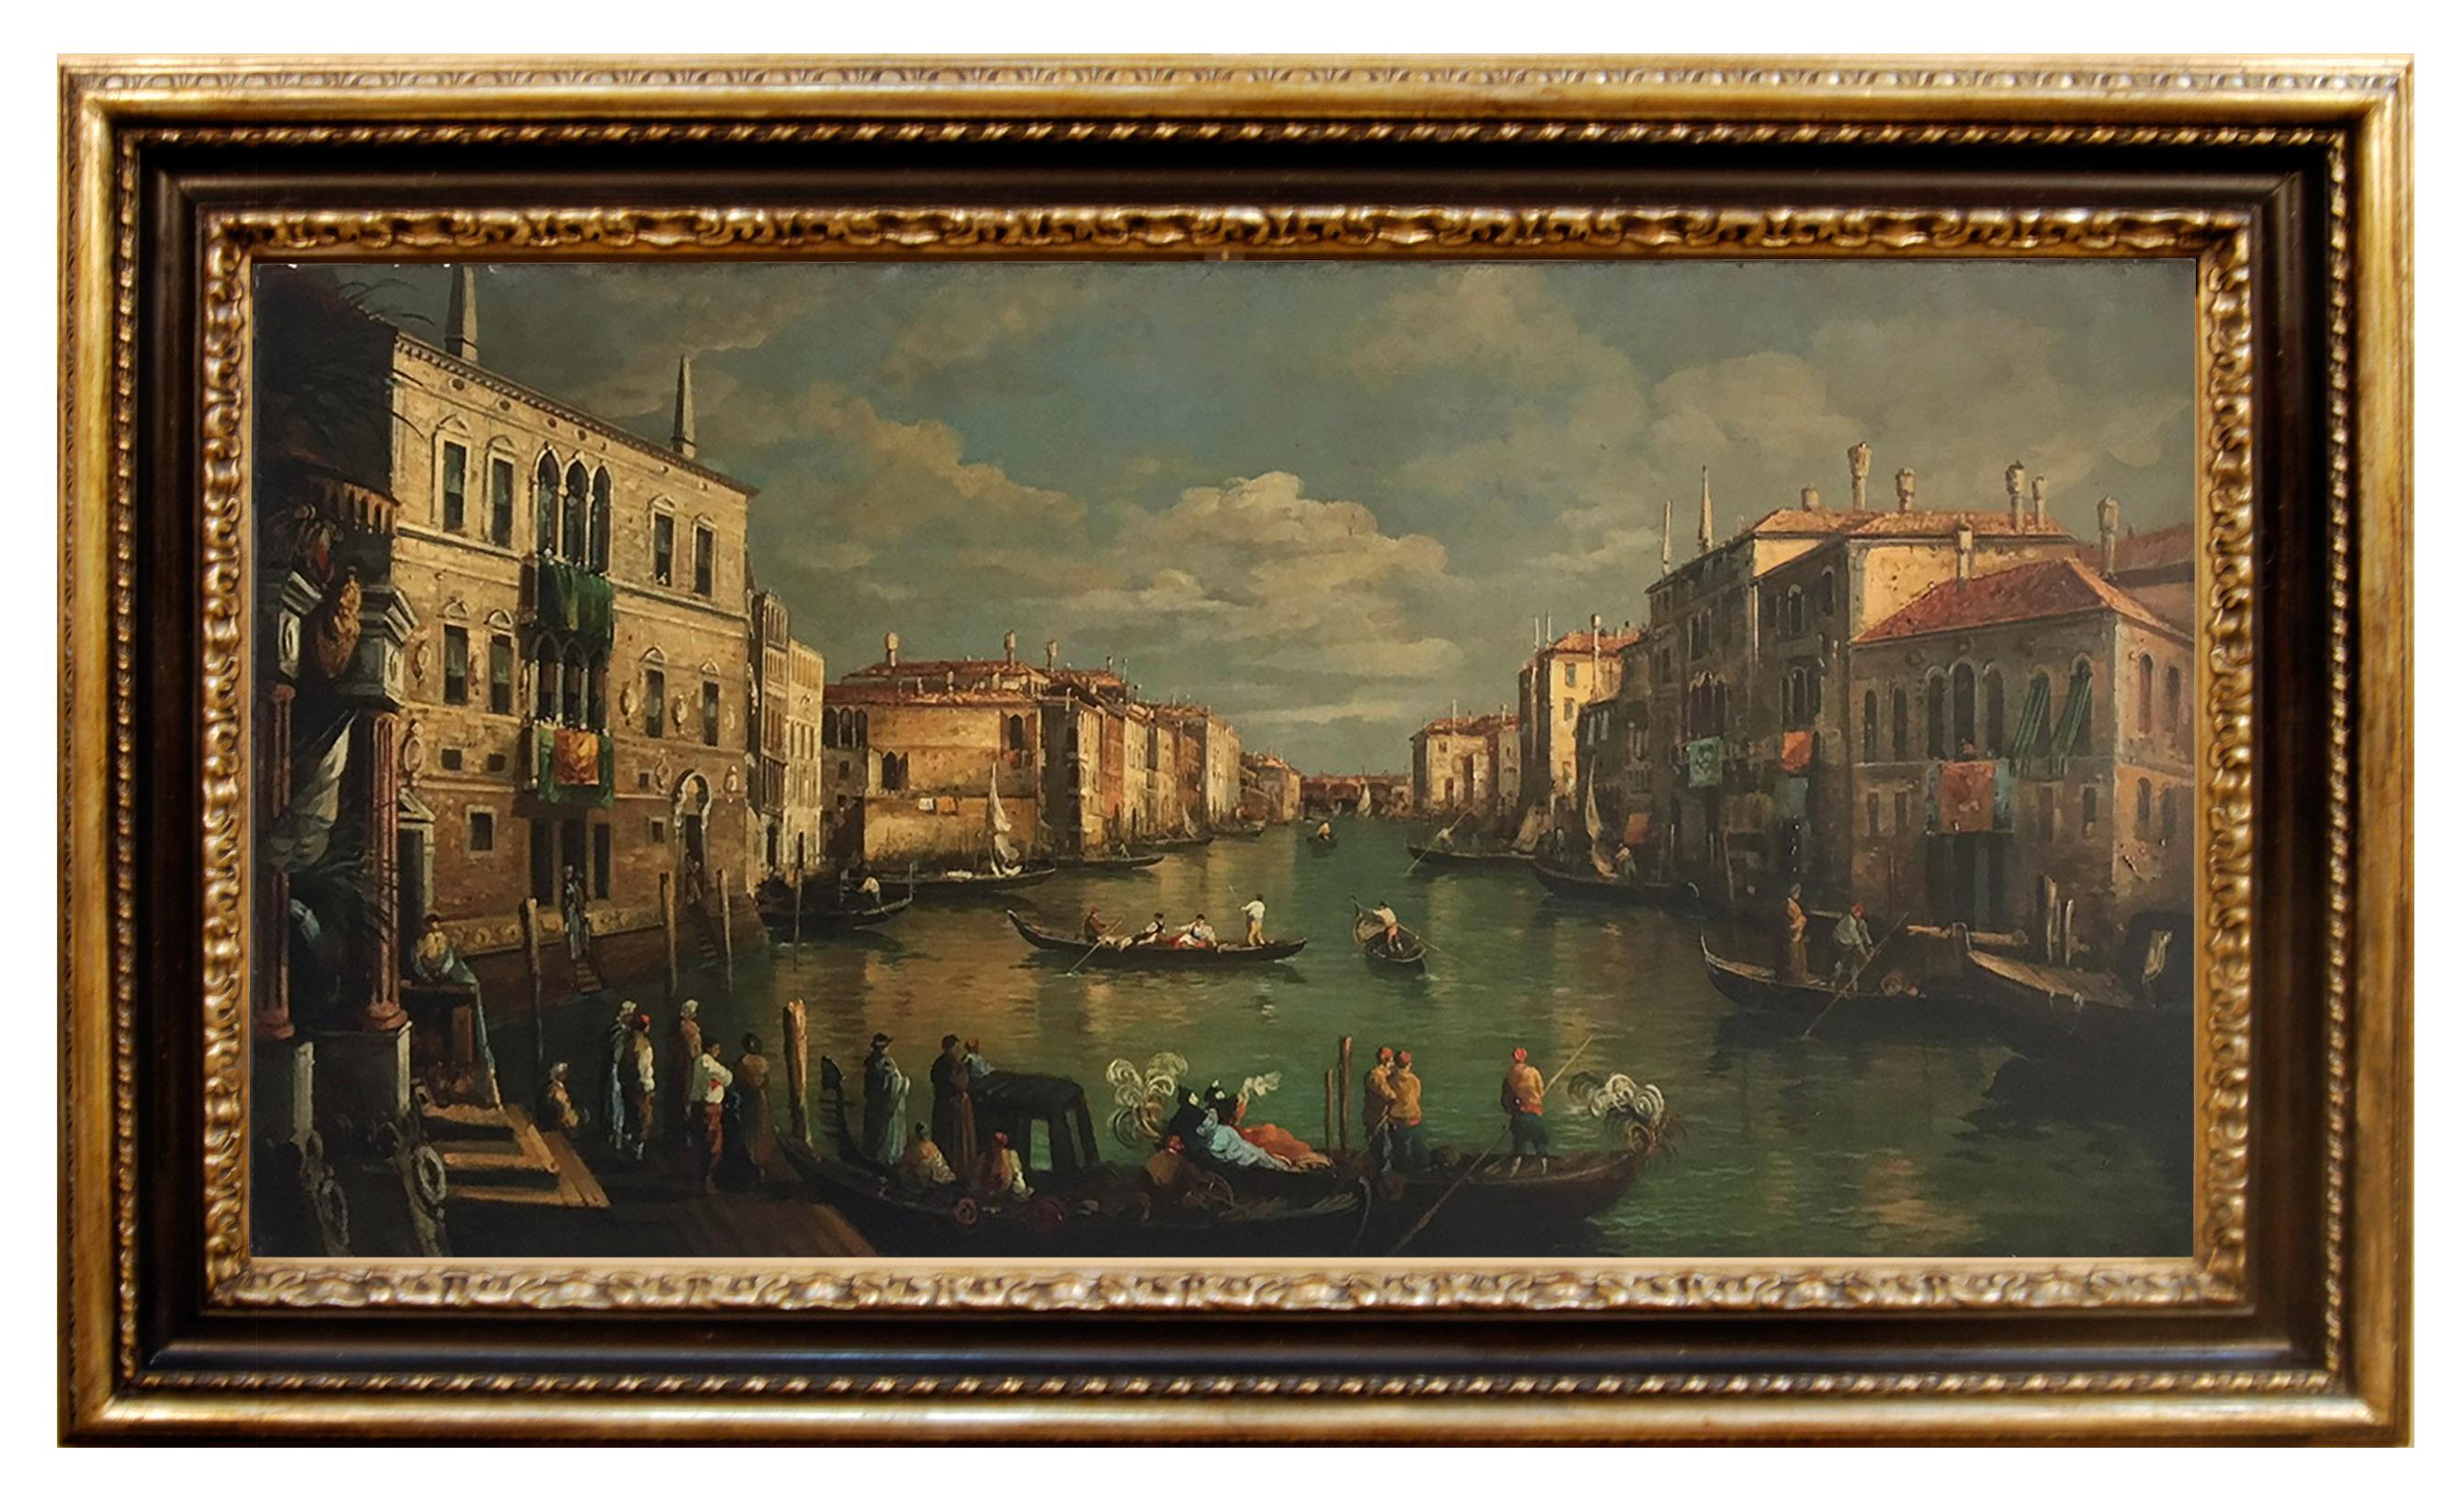 Mario De Angeli Landscape Painting - VENICE - In the Manner of Canaletto -Italian Landscape Oil on Canvas Painting 